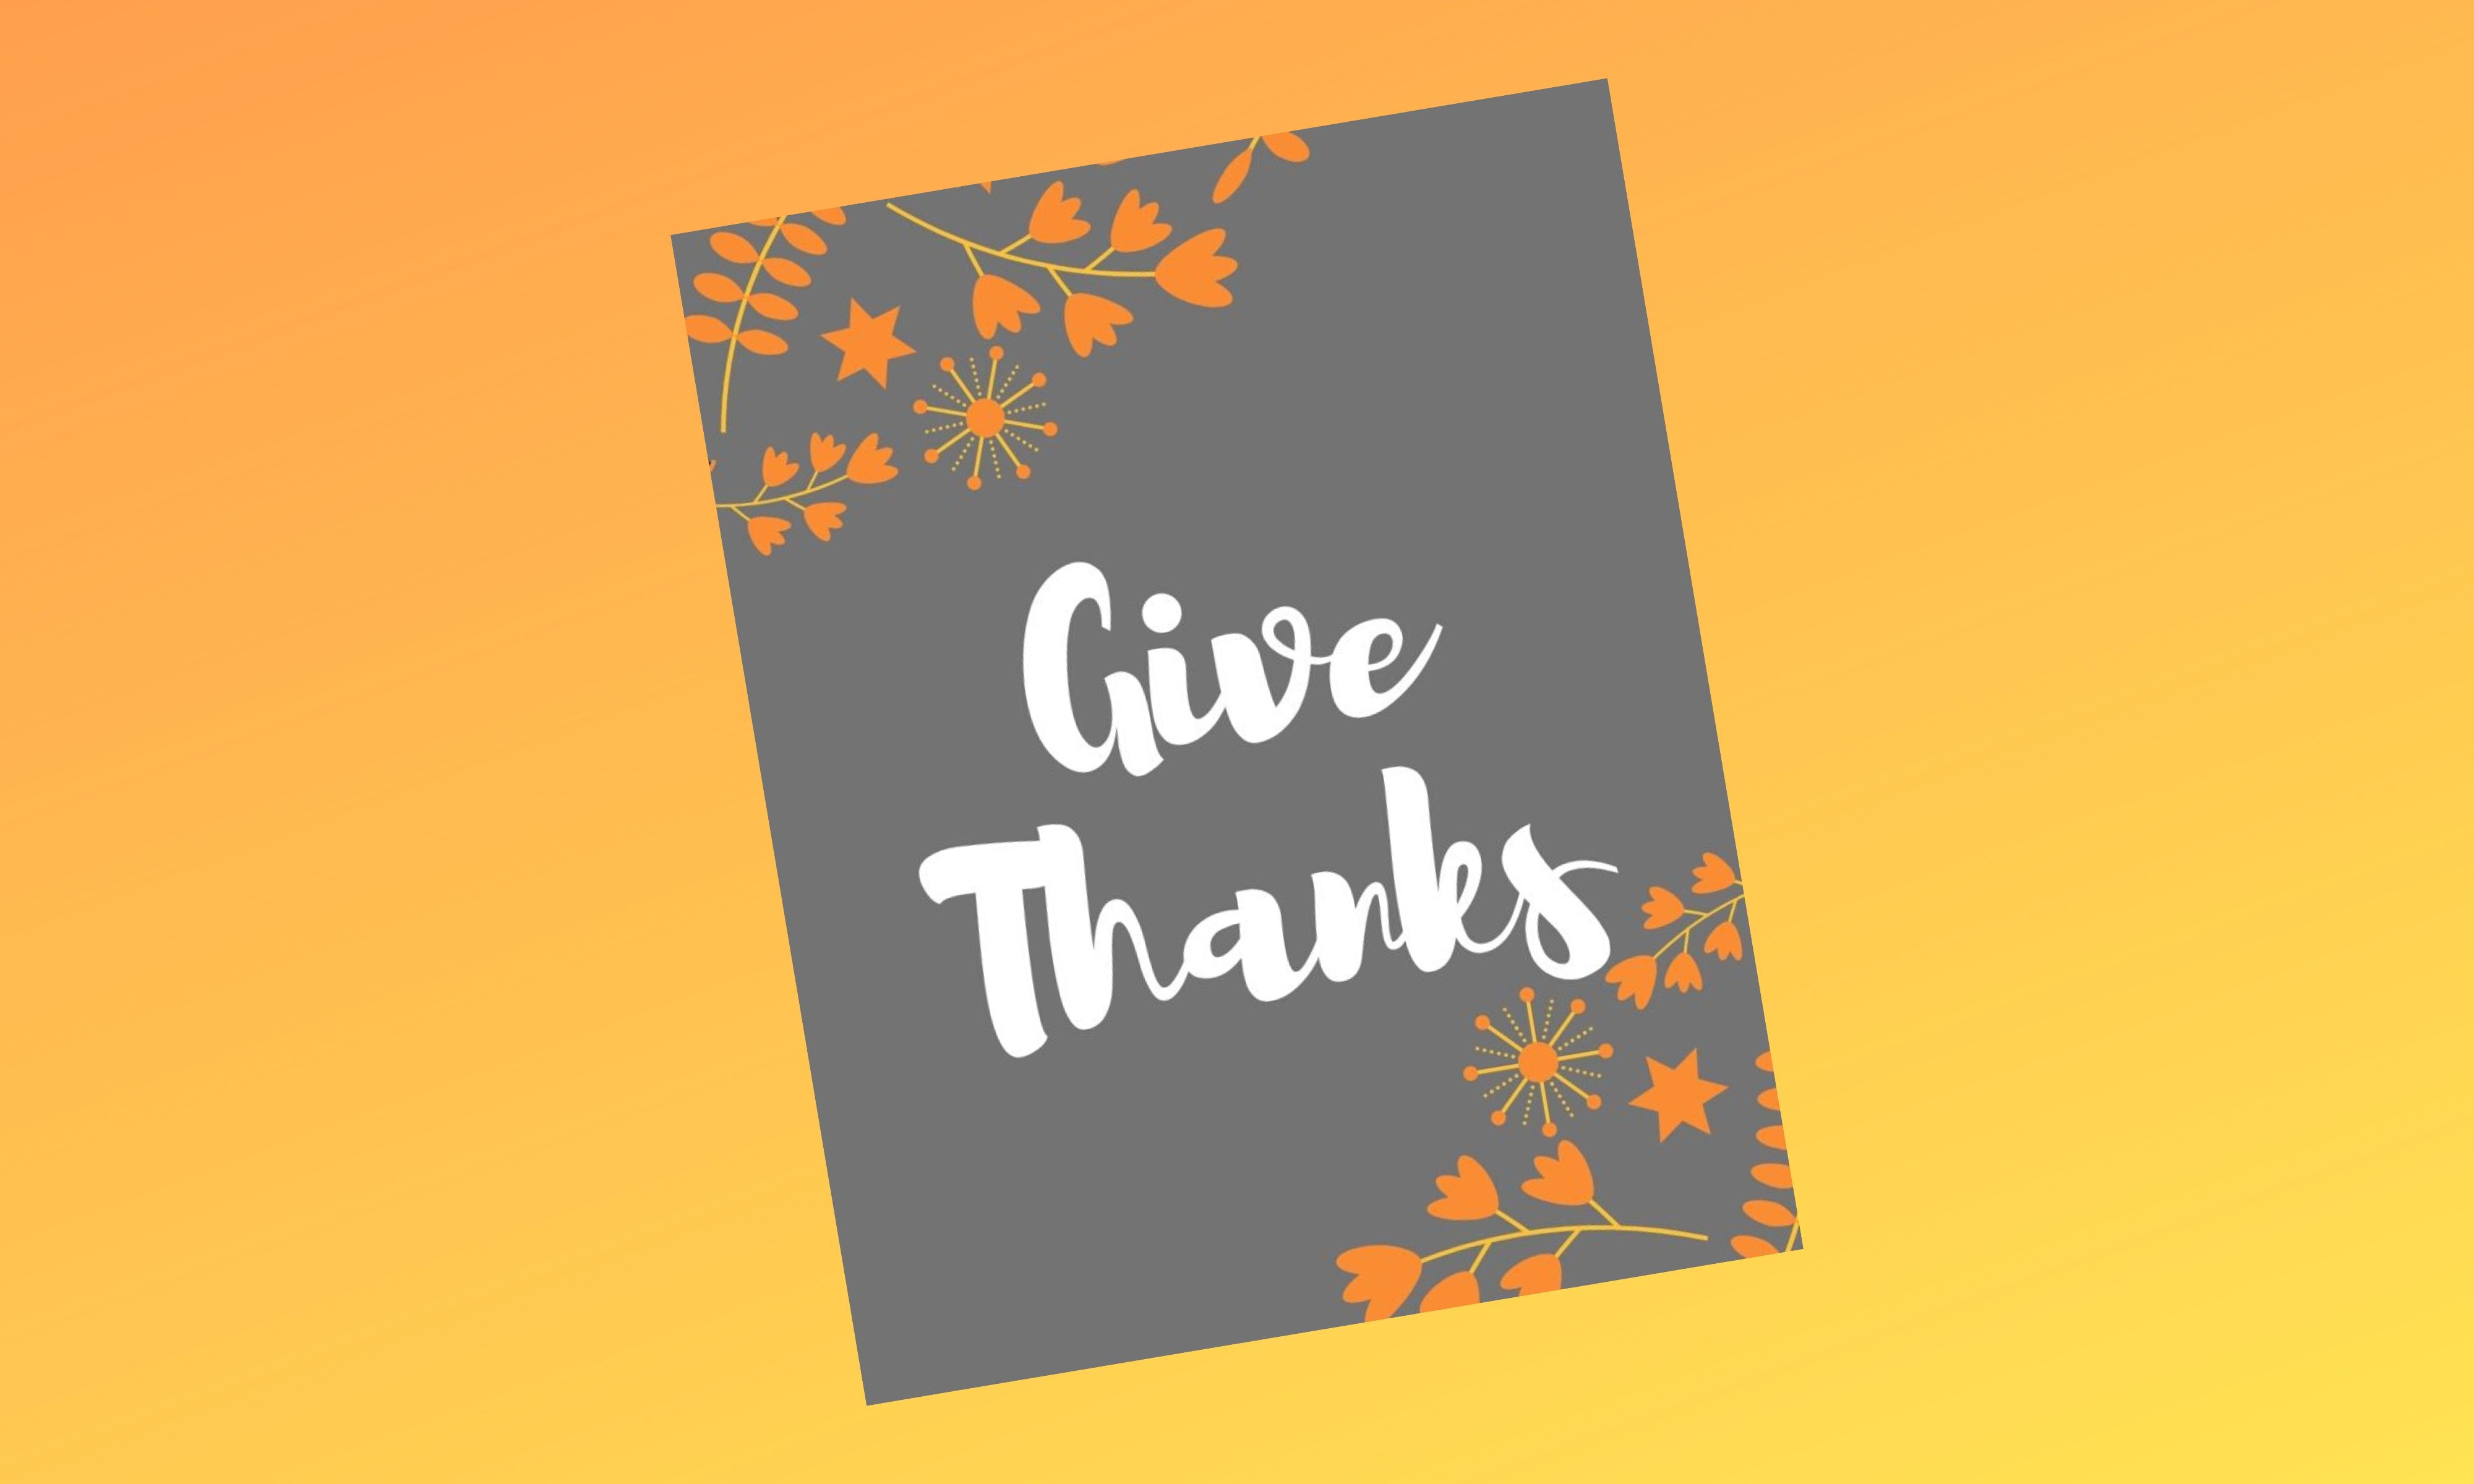 A grey picture that says Give Thanks in white bubble letters and small yellow/orange flower designs on the corners.